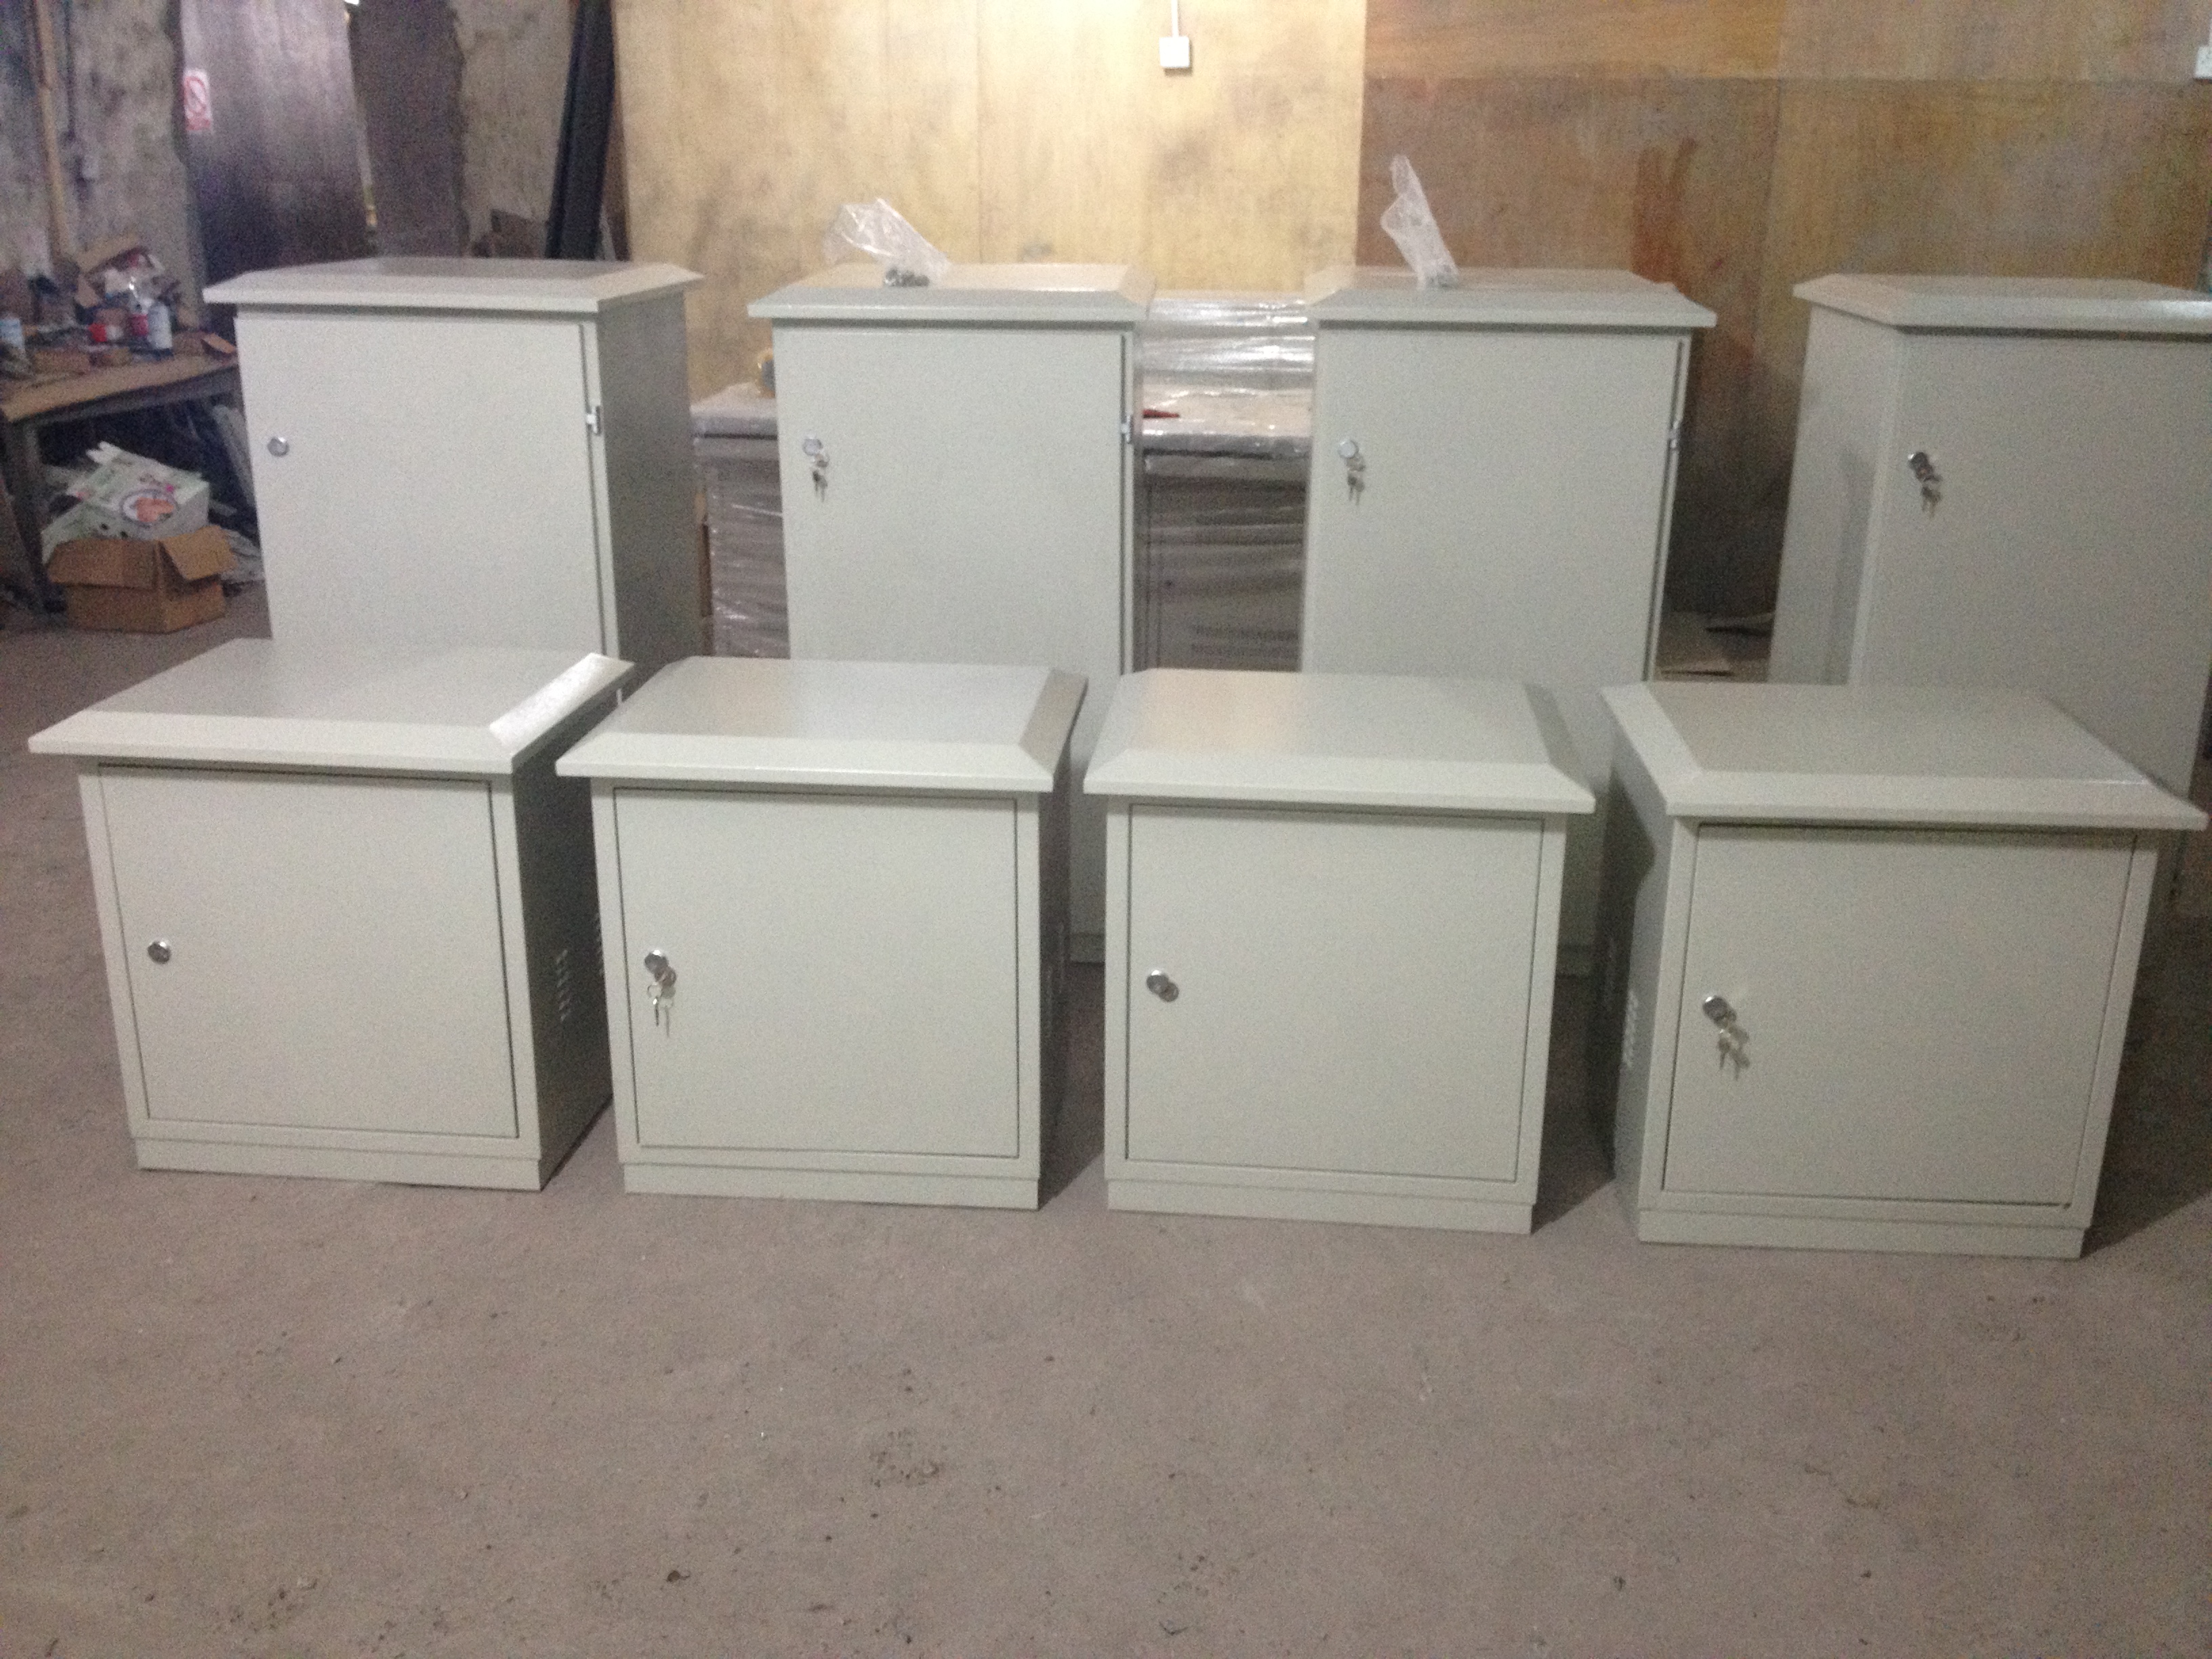 What should be paid attention to in the outdoor cabinet equipment shell design